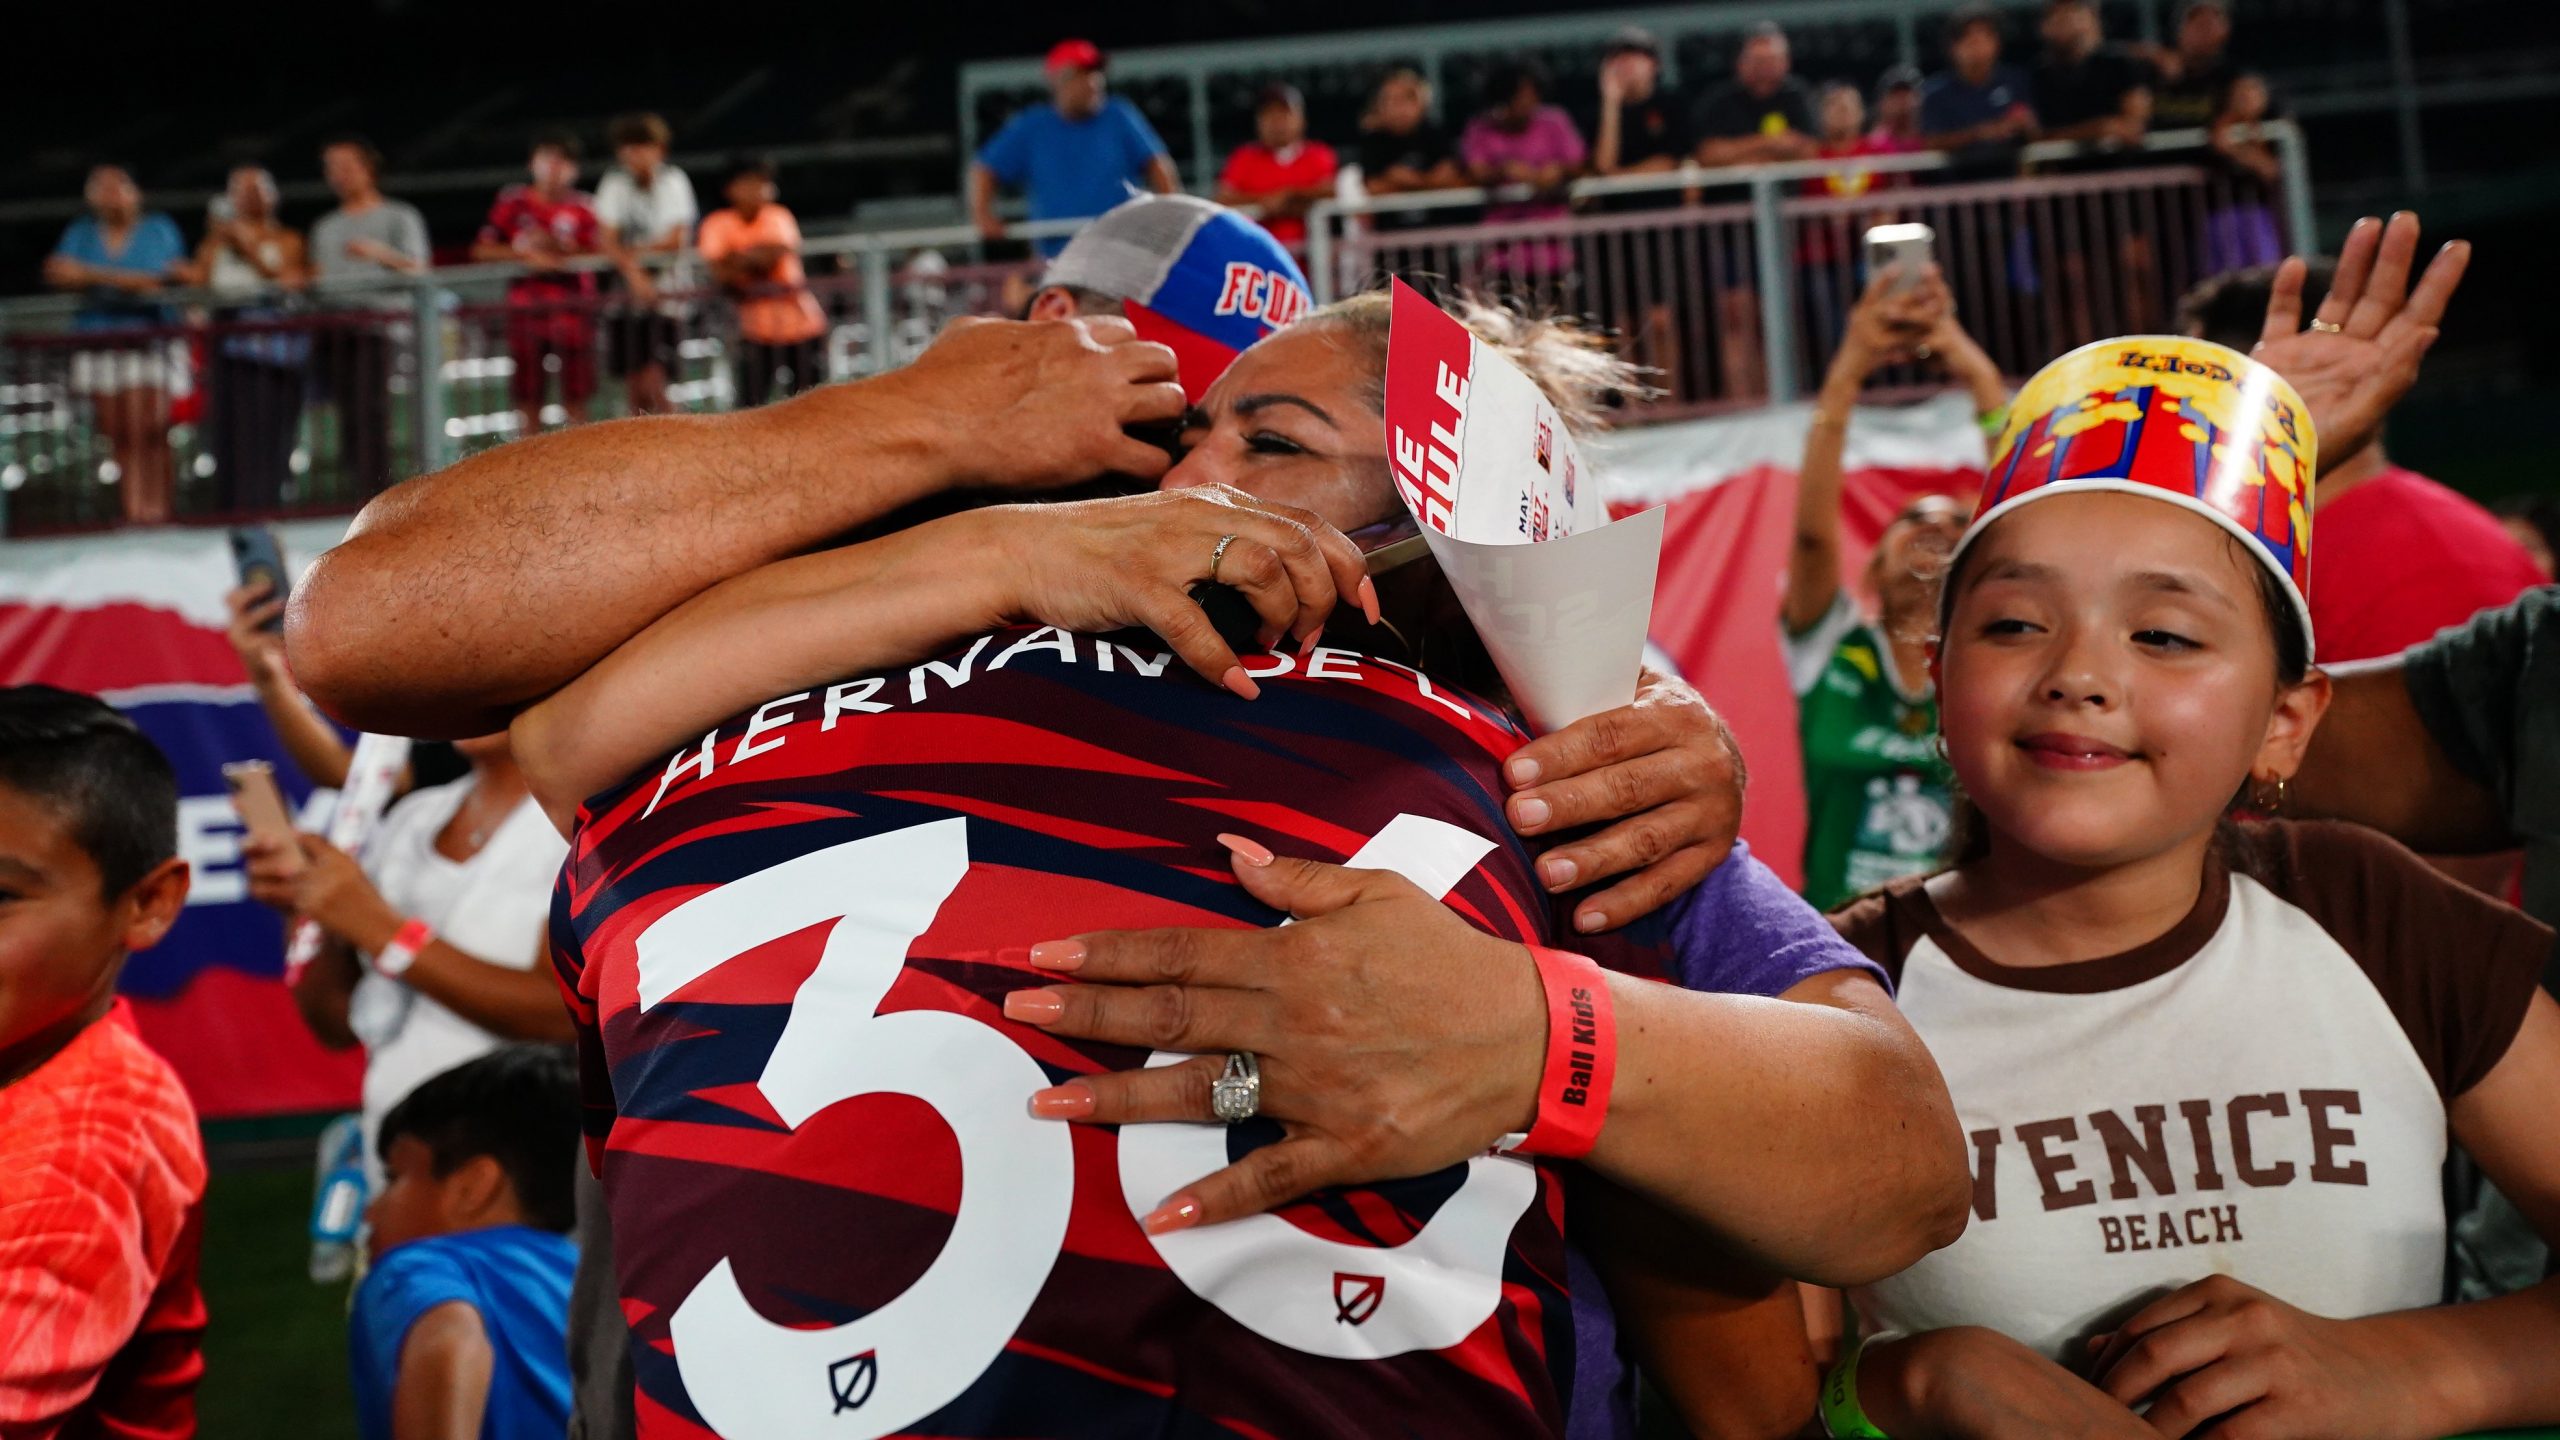 FCD U19 Diego Hernandez hugs his parents after his final game for North Texas SC before joining Furman. (Courtesy NTXSC)